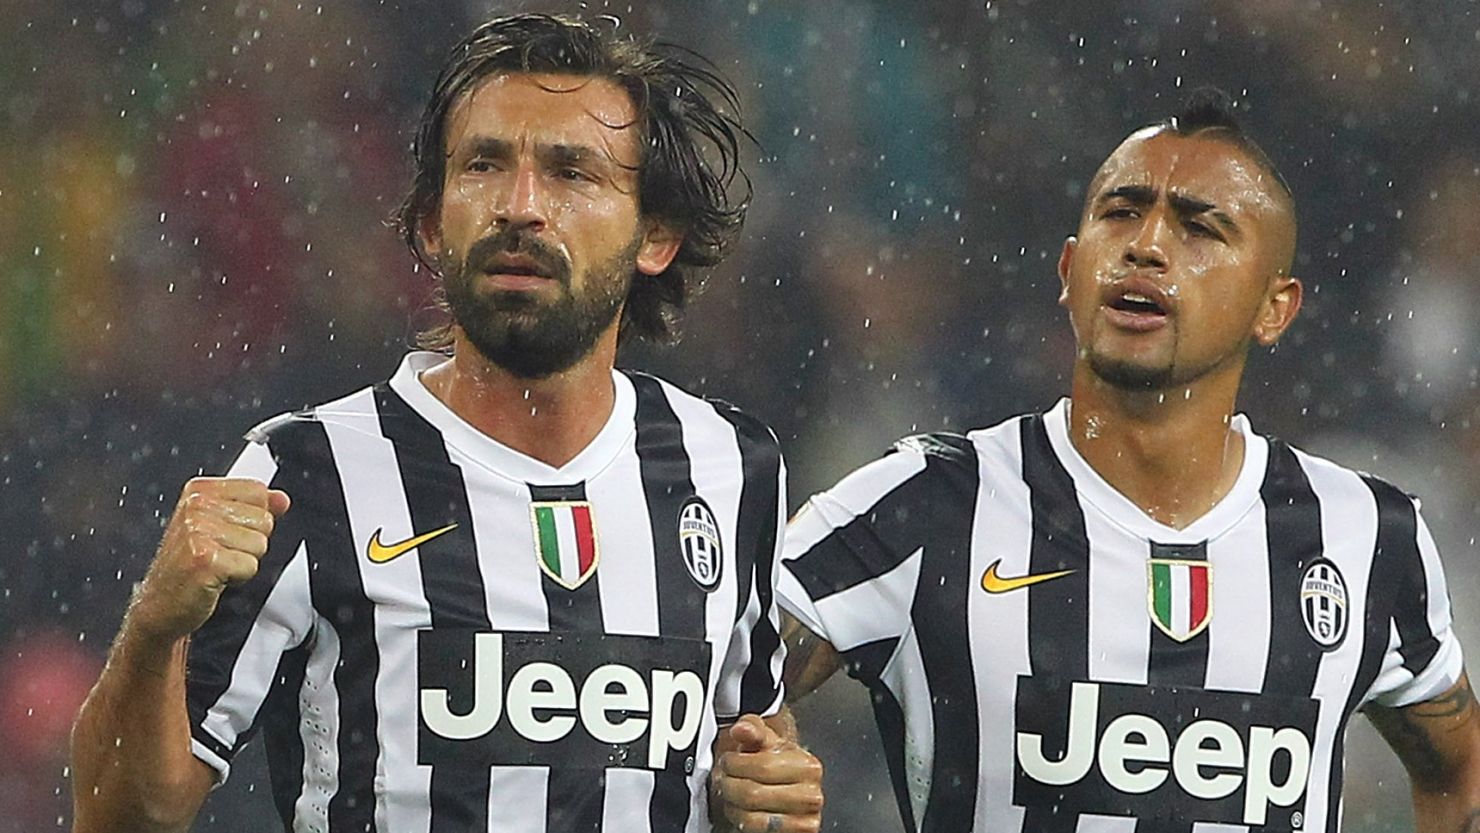 Juventus playmaker Andrea Pirlo with Arturo Vidal (right) after scoring in Sunday's 3-2 win against AC Milan.